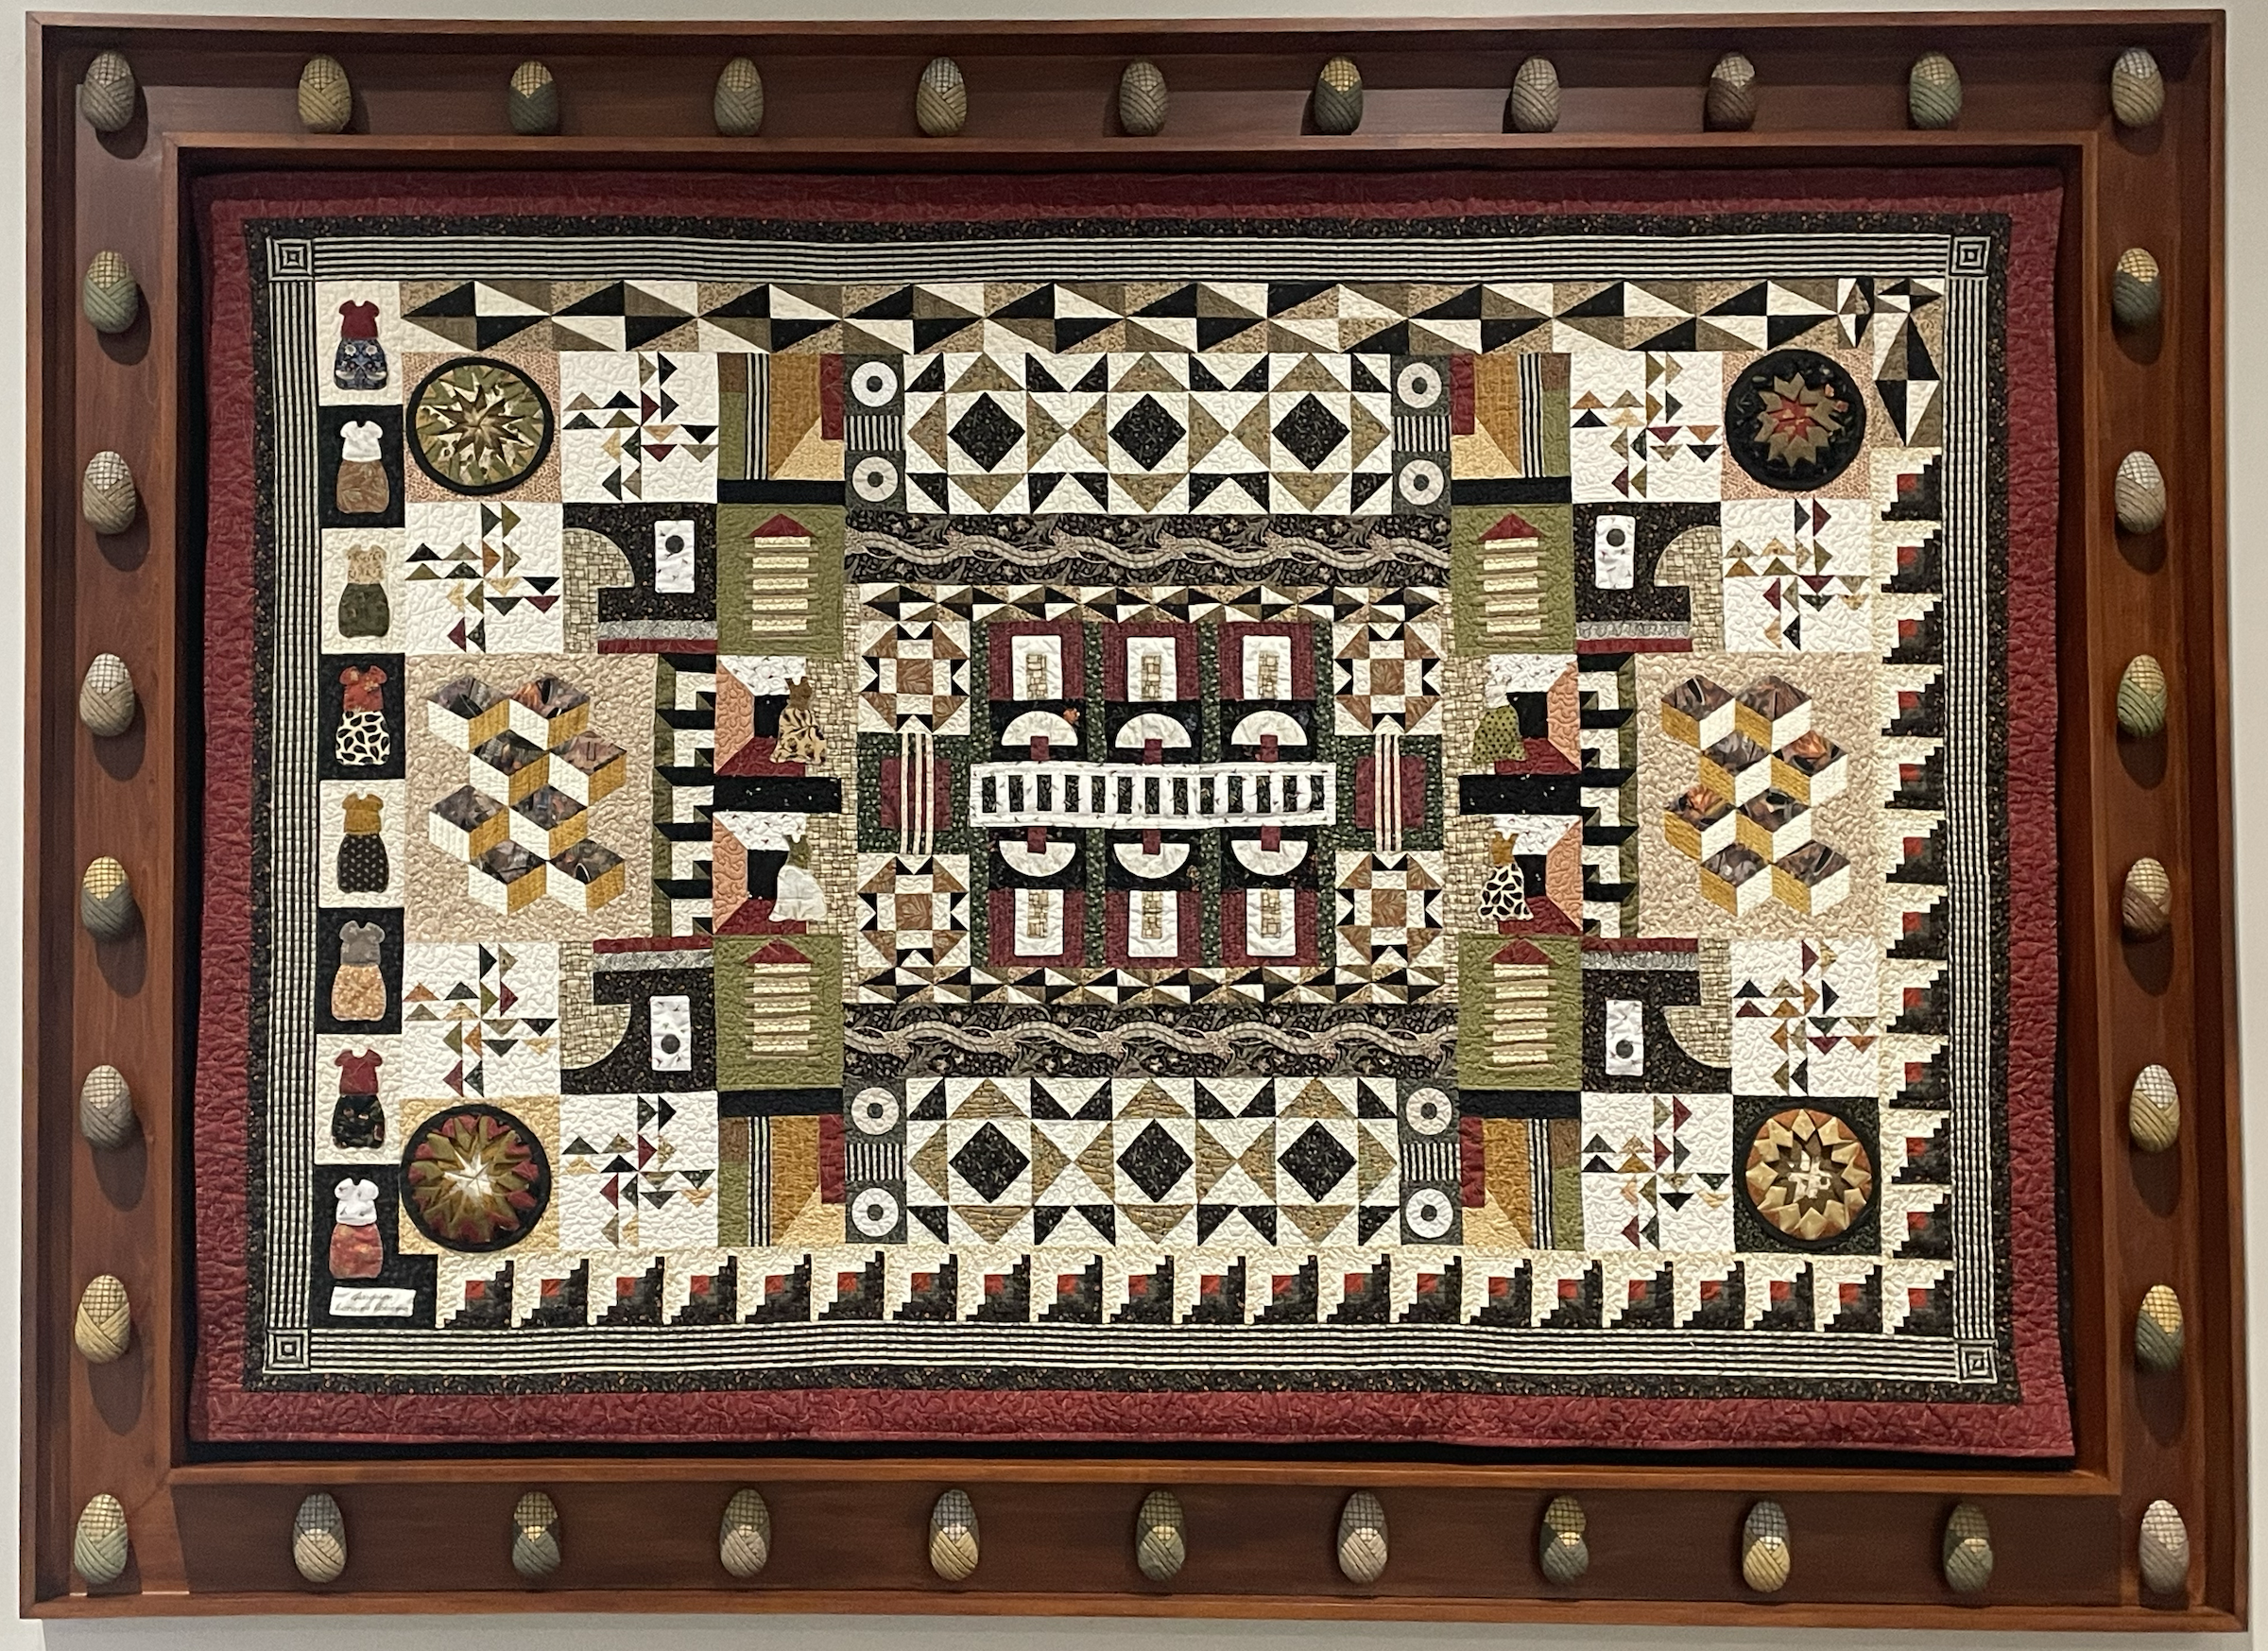 The image shows a quilt framed in a dark wood frame with decorative accents. The quilt is made of various fabrics in black, white, brown, beige, and green, and features a complex geometric pattern. The quilt is displayed against a light-colored wall. The frame is decorated with small, rounded objects that are evenly spaced around the edge.